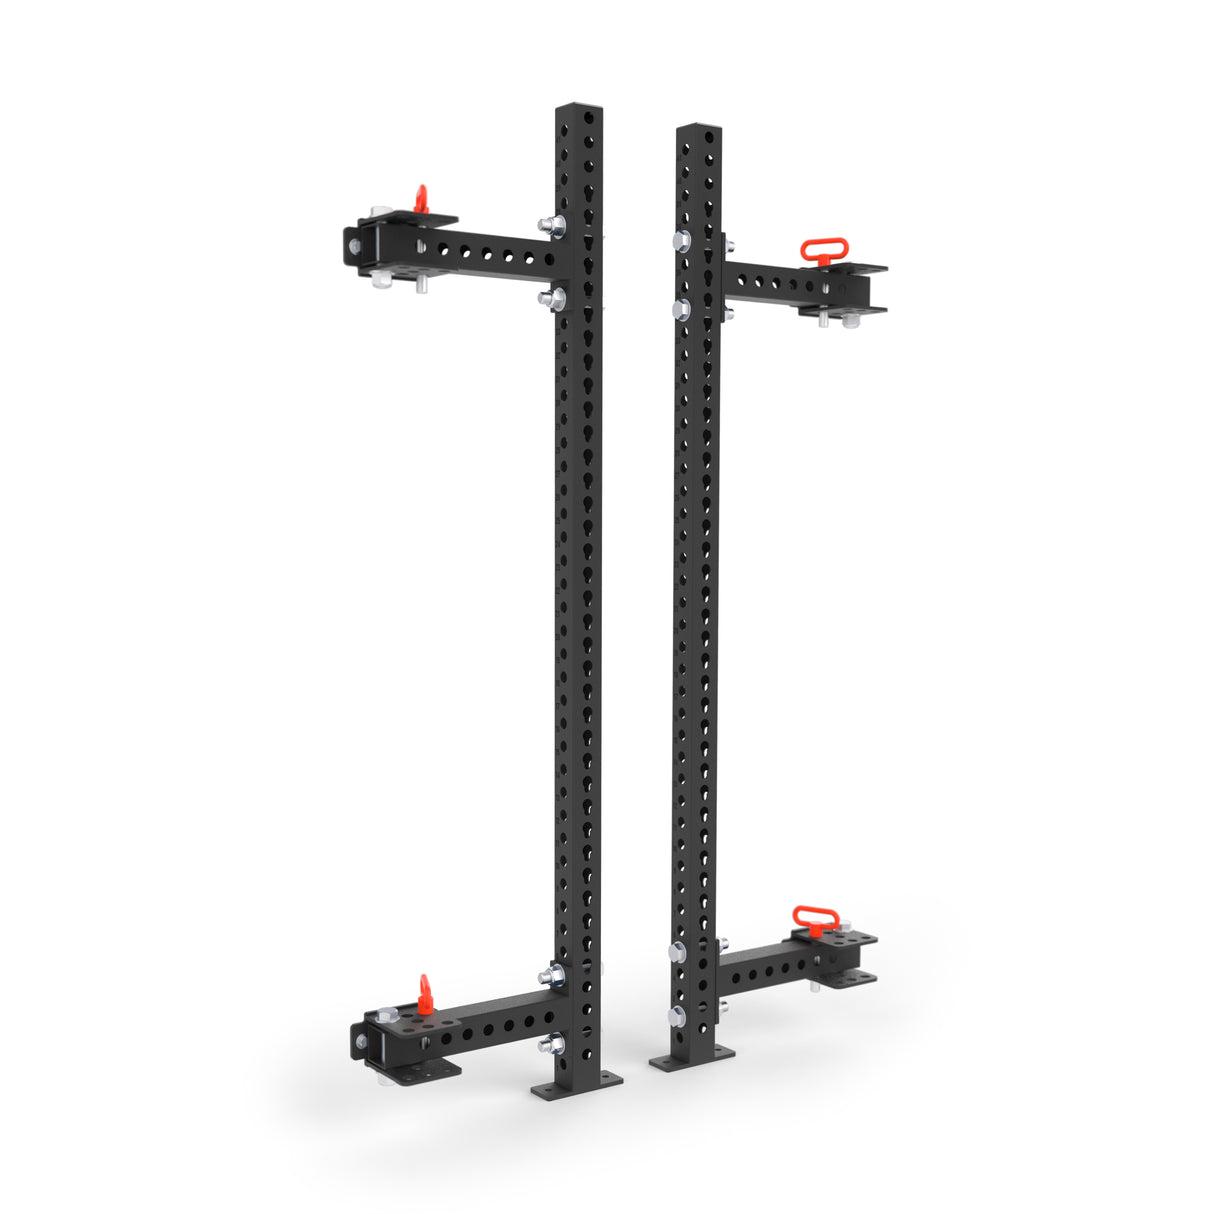 Product picture of the Manticore Folding Power Half Rack PREBUILT folded